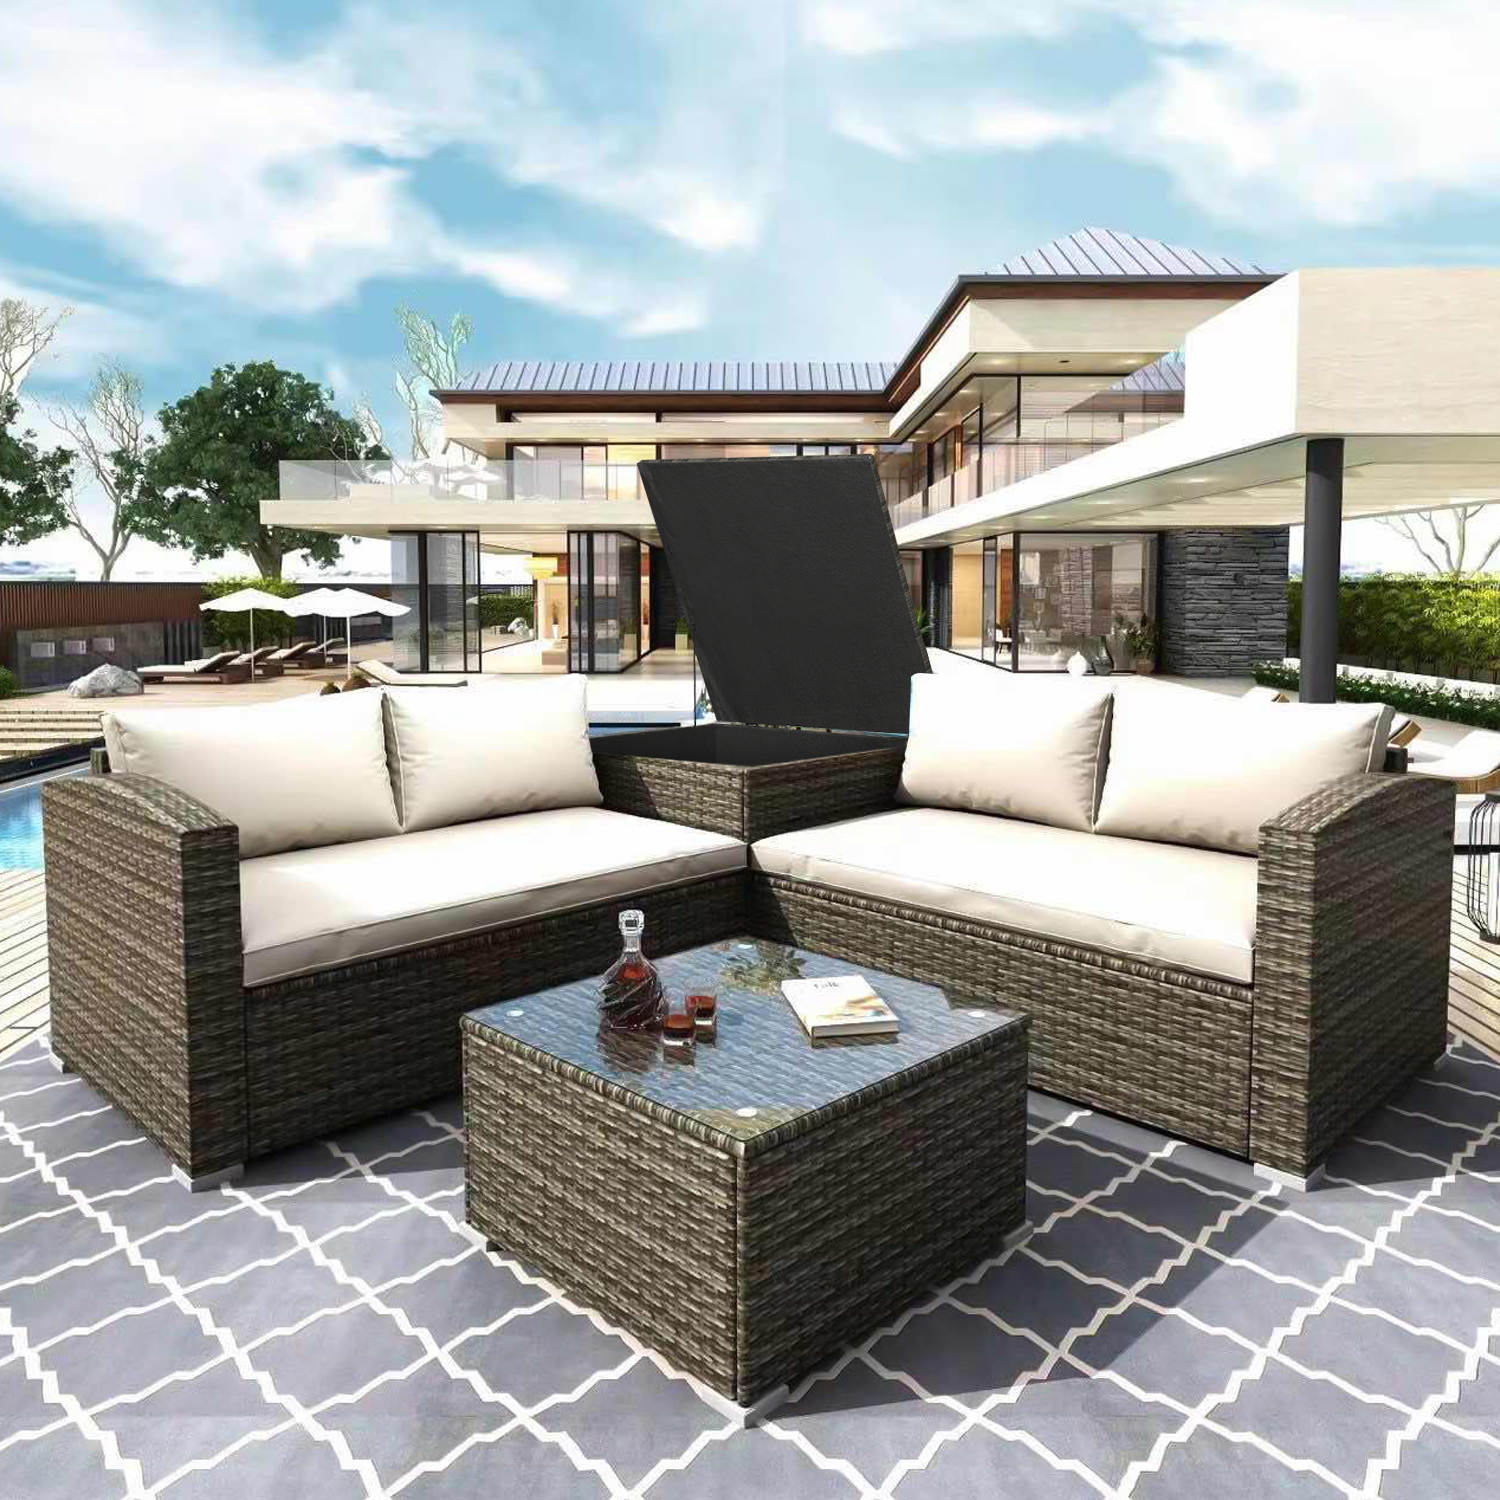 Outdoor Patio Furniture Set, Rattan Chairs & Seating Sets for Backyard, 4-Piece Wicker Conversation Set w/L-Seats Sofa, R-Seats Sofa, Cushion box, Tempered Glass Dining Table, Padded Cushions, S13116 - image 1 of 8